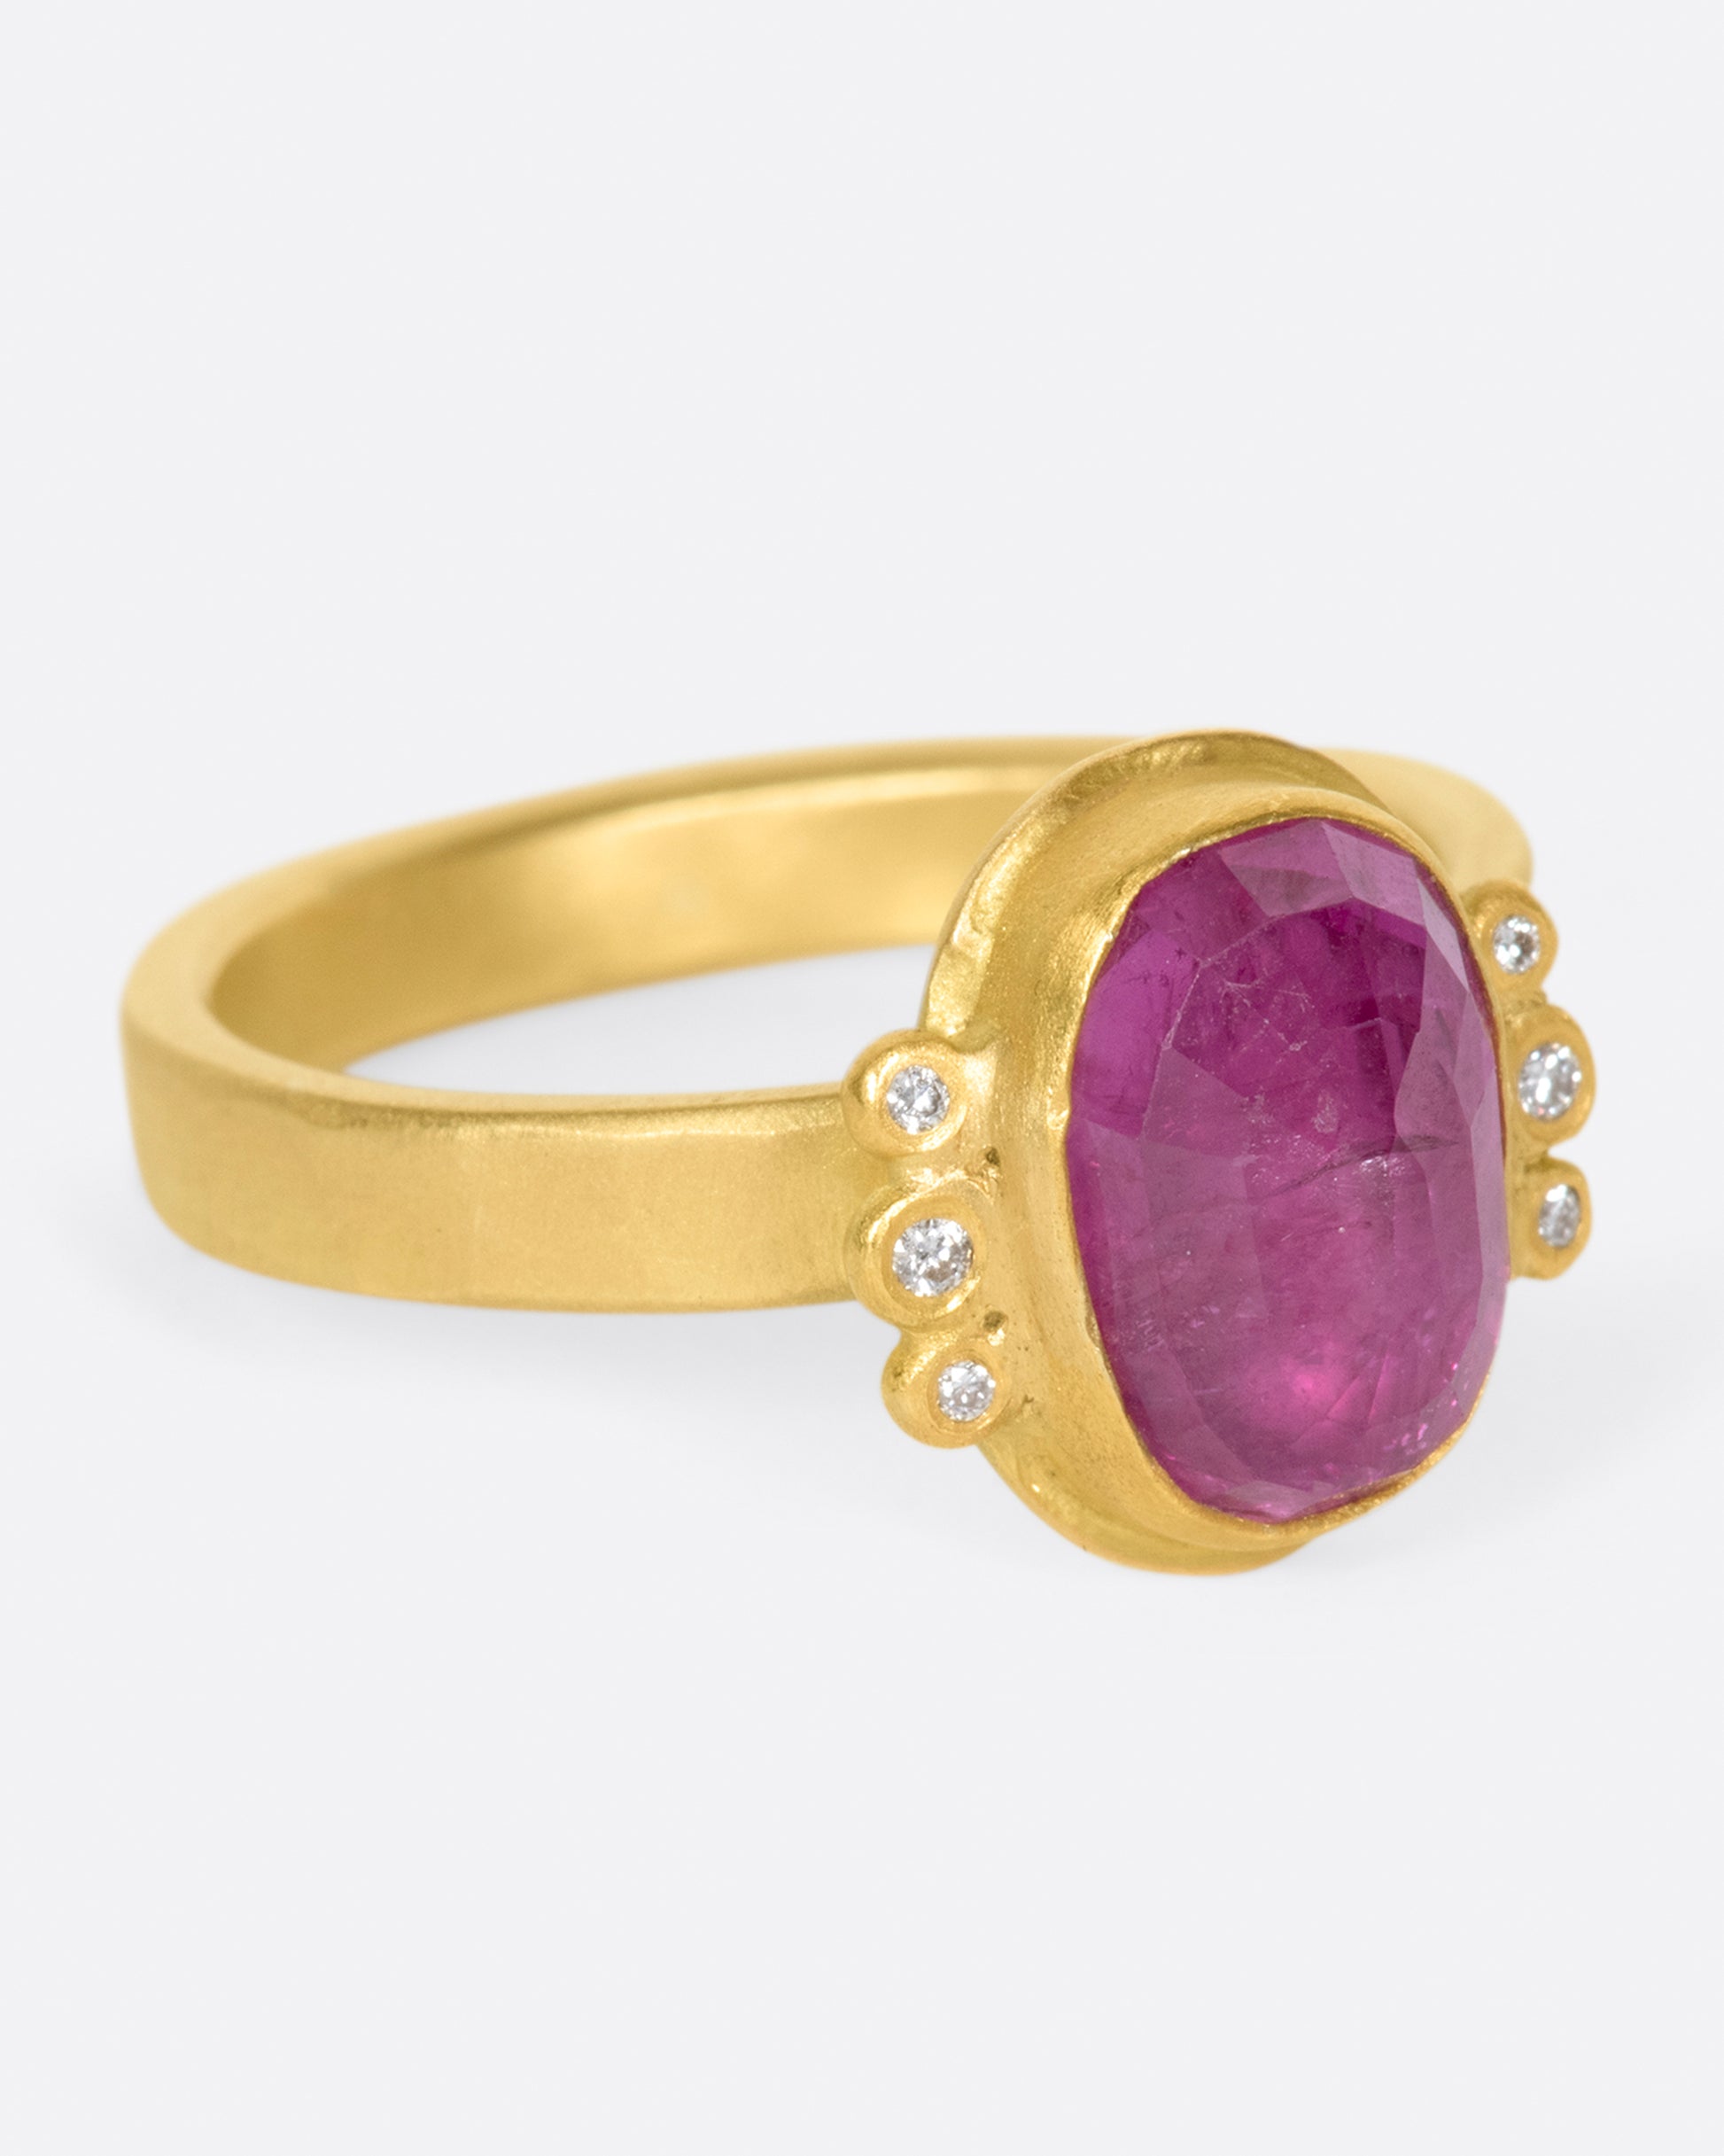 A saturated, faceted ruby shines in a high karat gold bezel with diamond accents.